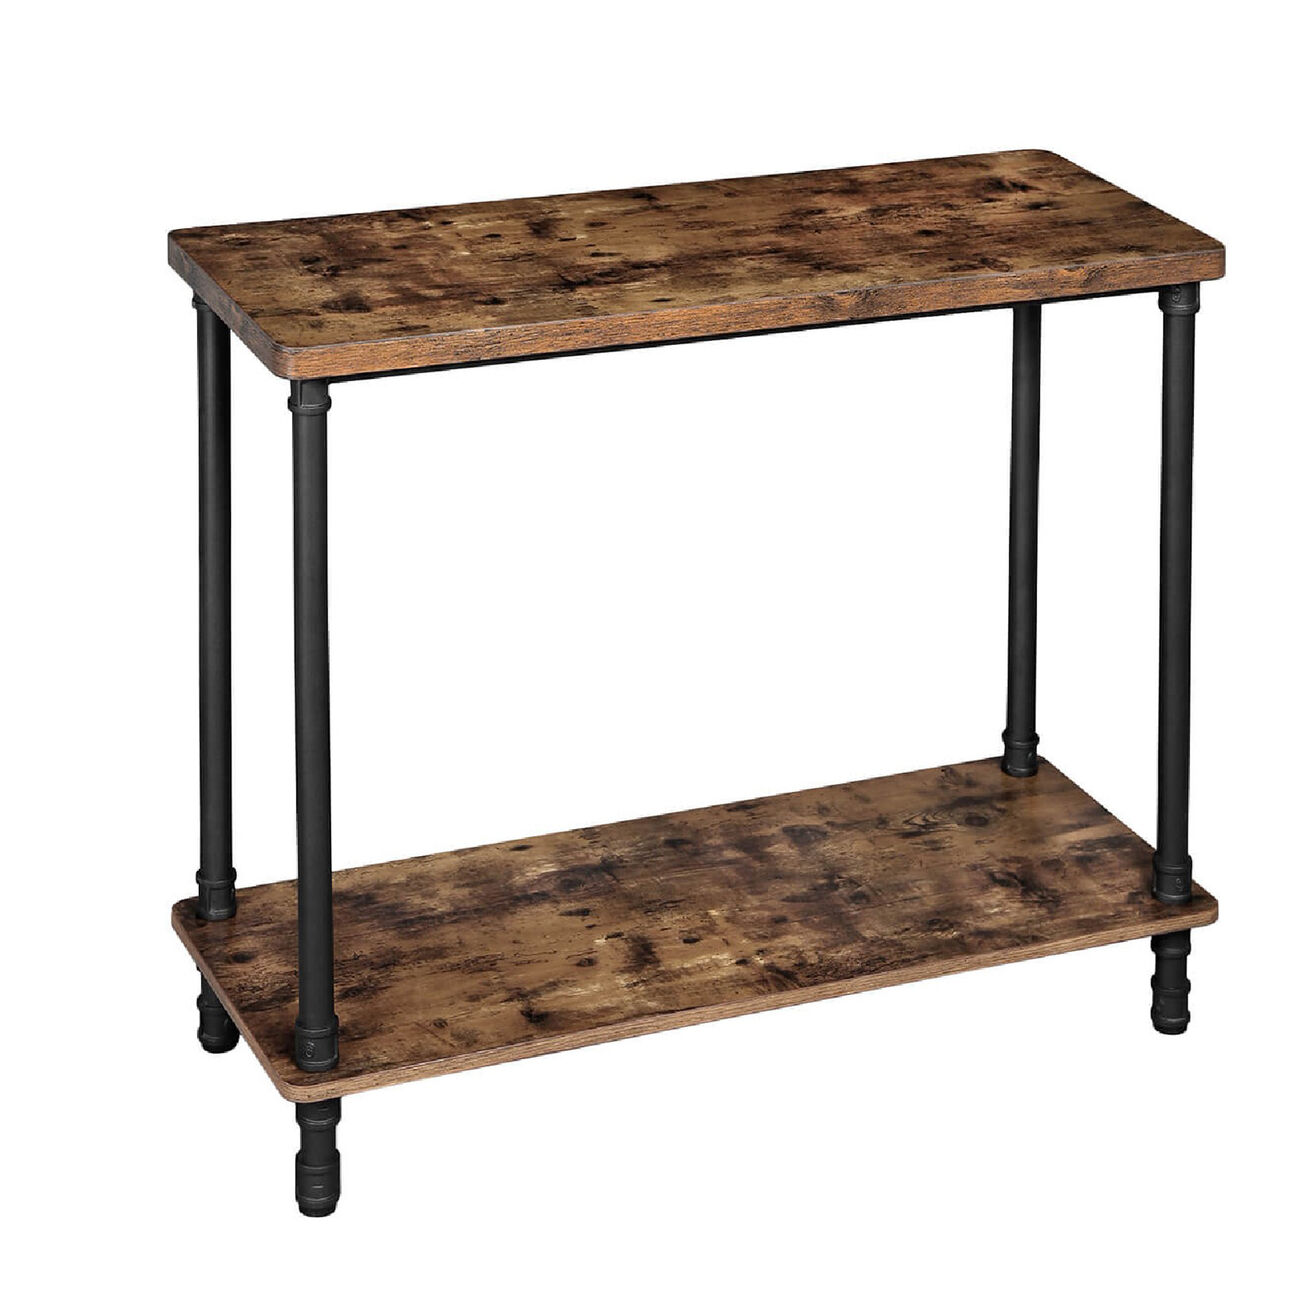 Wood and Metal Frame Console Table with Open Bottom Shelf, Rustic Brown